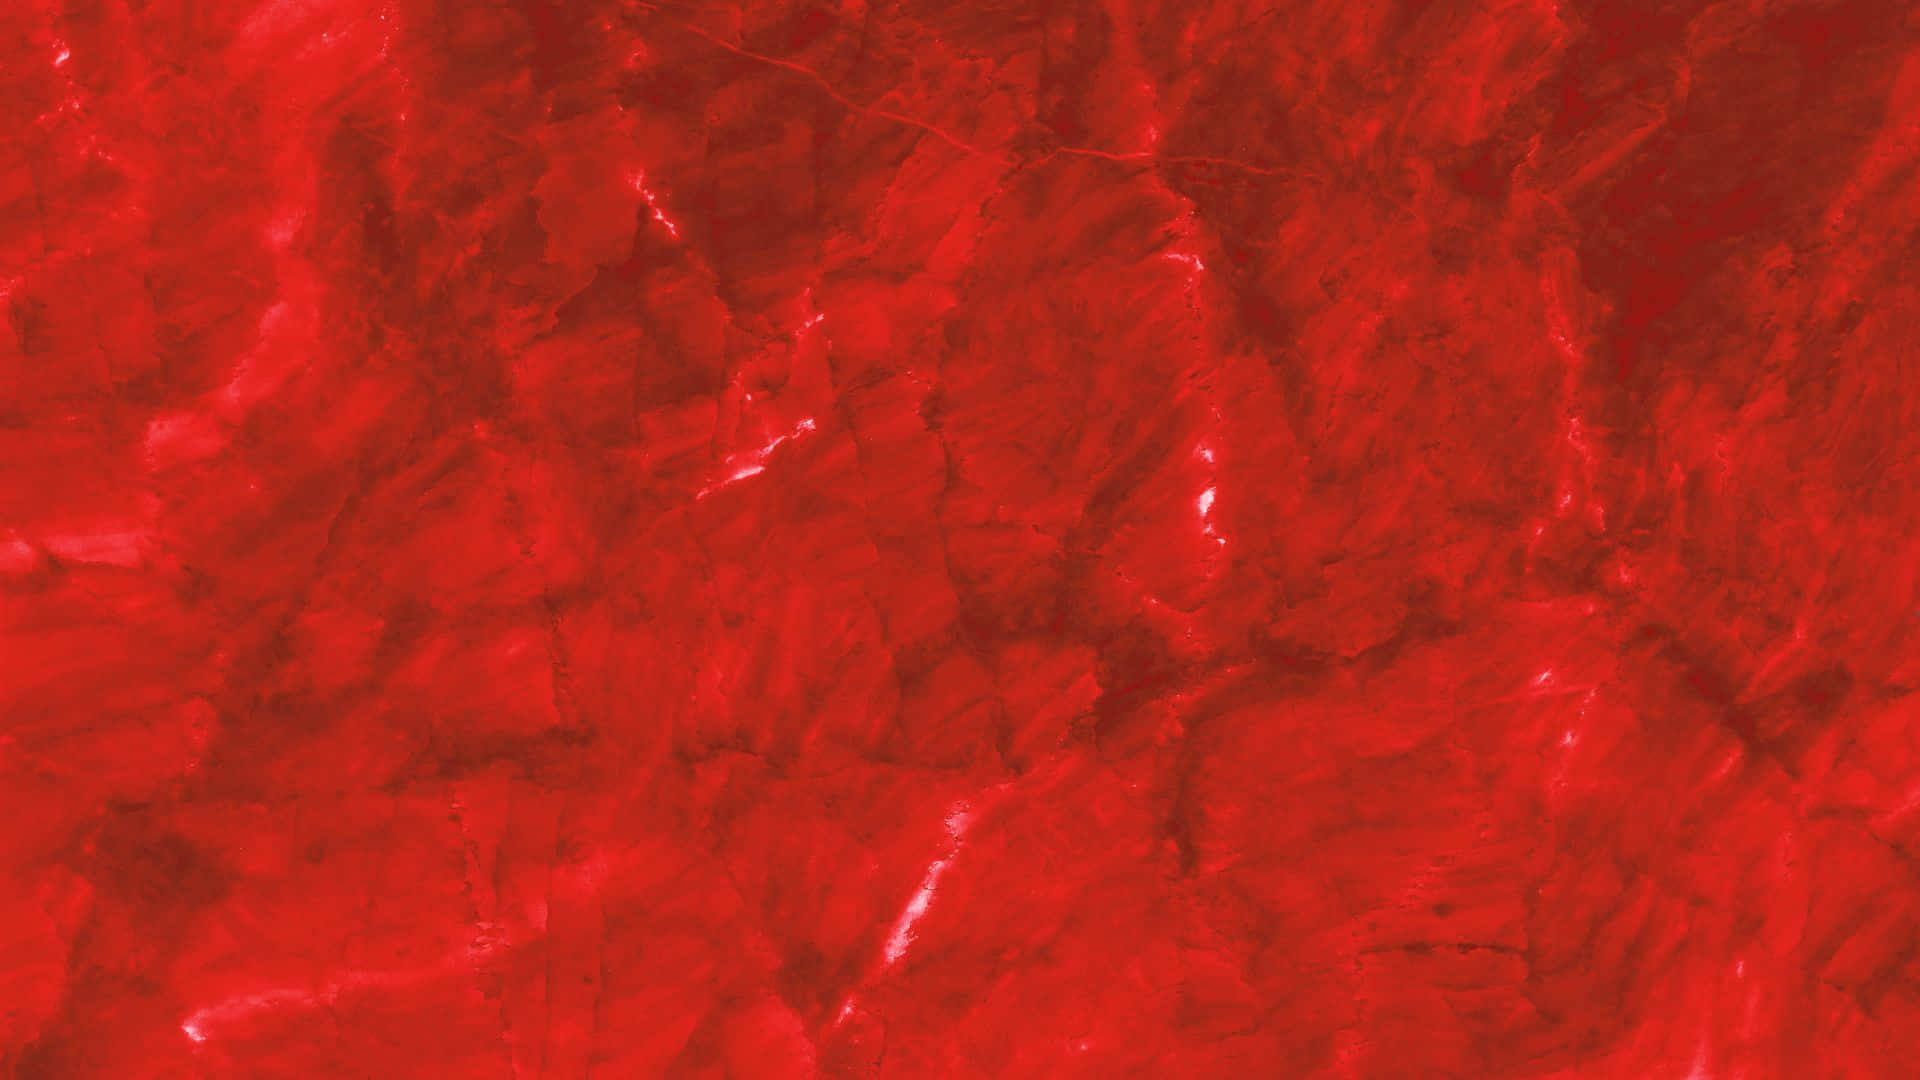 Red Texture Images  Free Download on Freepik